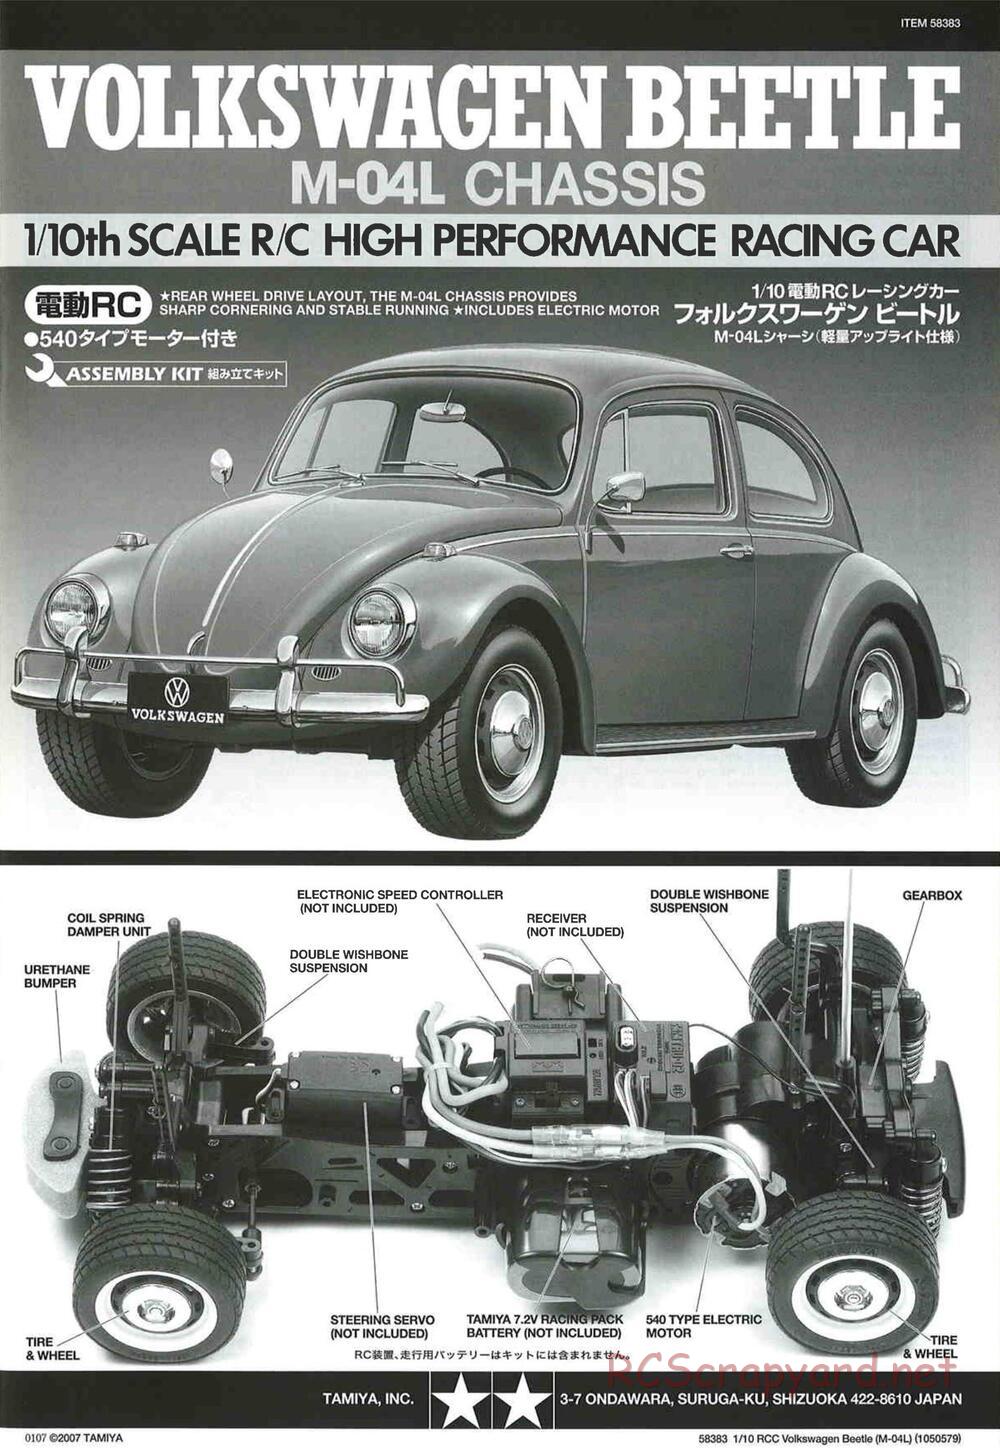 Tamiya - Volkswagen Beetle - M04L Chassis - Manual - Page 1